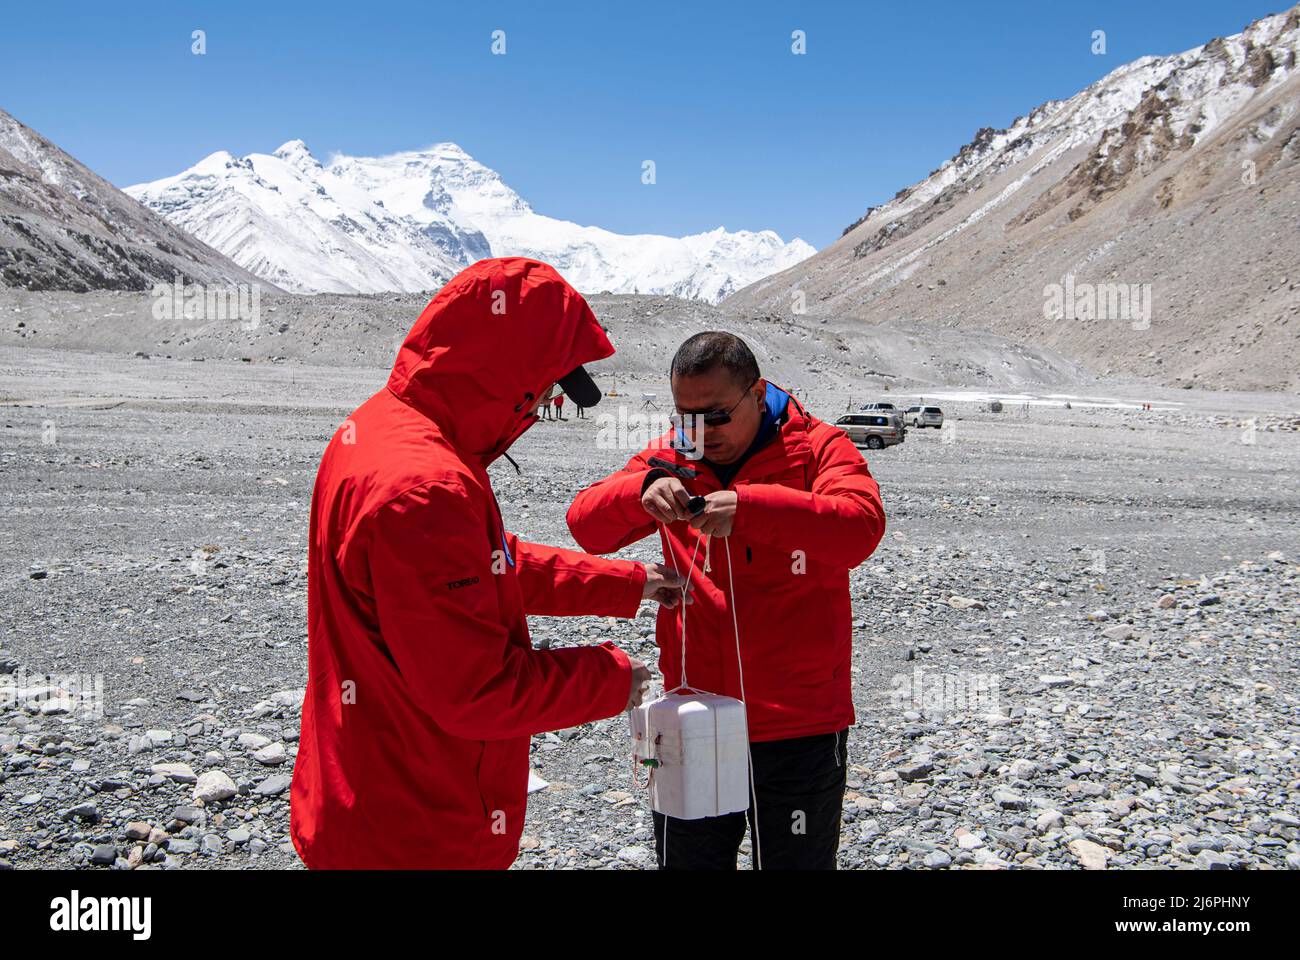 MOUNT QOMOLANGMA BASE CAMP, May 3, 2022 (Xinhua) -- Scientific research members prepare the radiosonde and ozonesonde to be attached to a weather balloon at the Mount Qomolangma base camp on May 3, 2022.  China has started a new comprehensive scientific expedition on Mount Qomolangma, the world's highest peak on the China-Nepal border.   Weather factors such as temperature, wind speed and humidity will directly affect the completion of scientific research tasks and the safety of research personnel at high altitude. Therefore, a meteorological support team has been launched in safeg Stock Photo